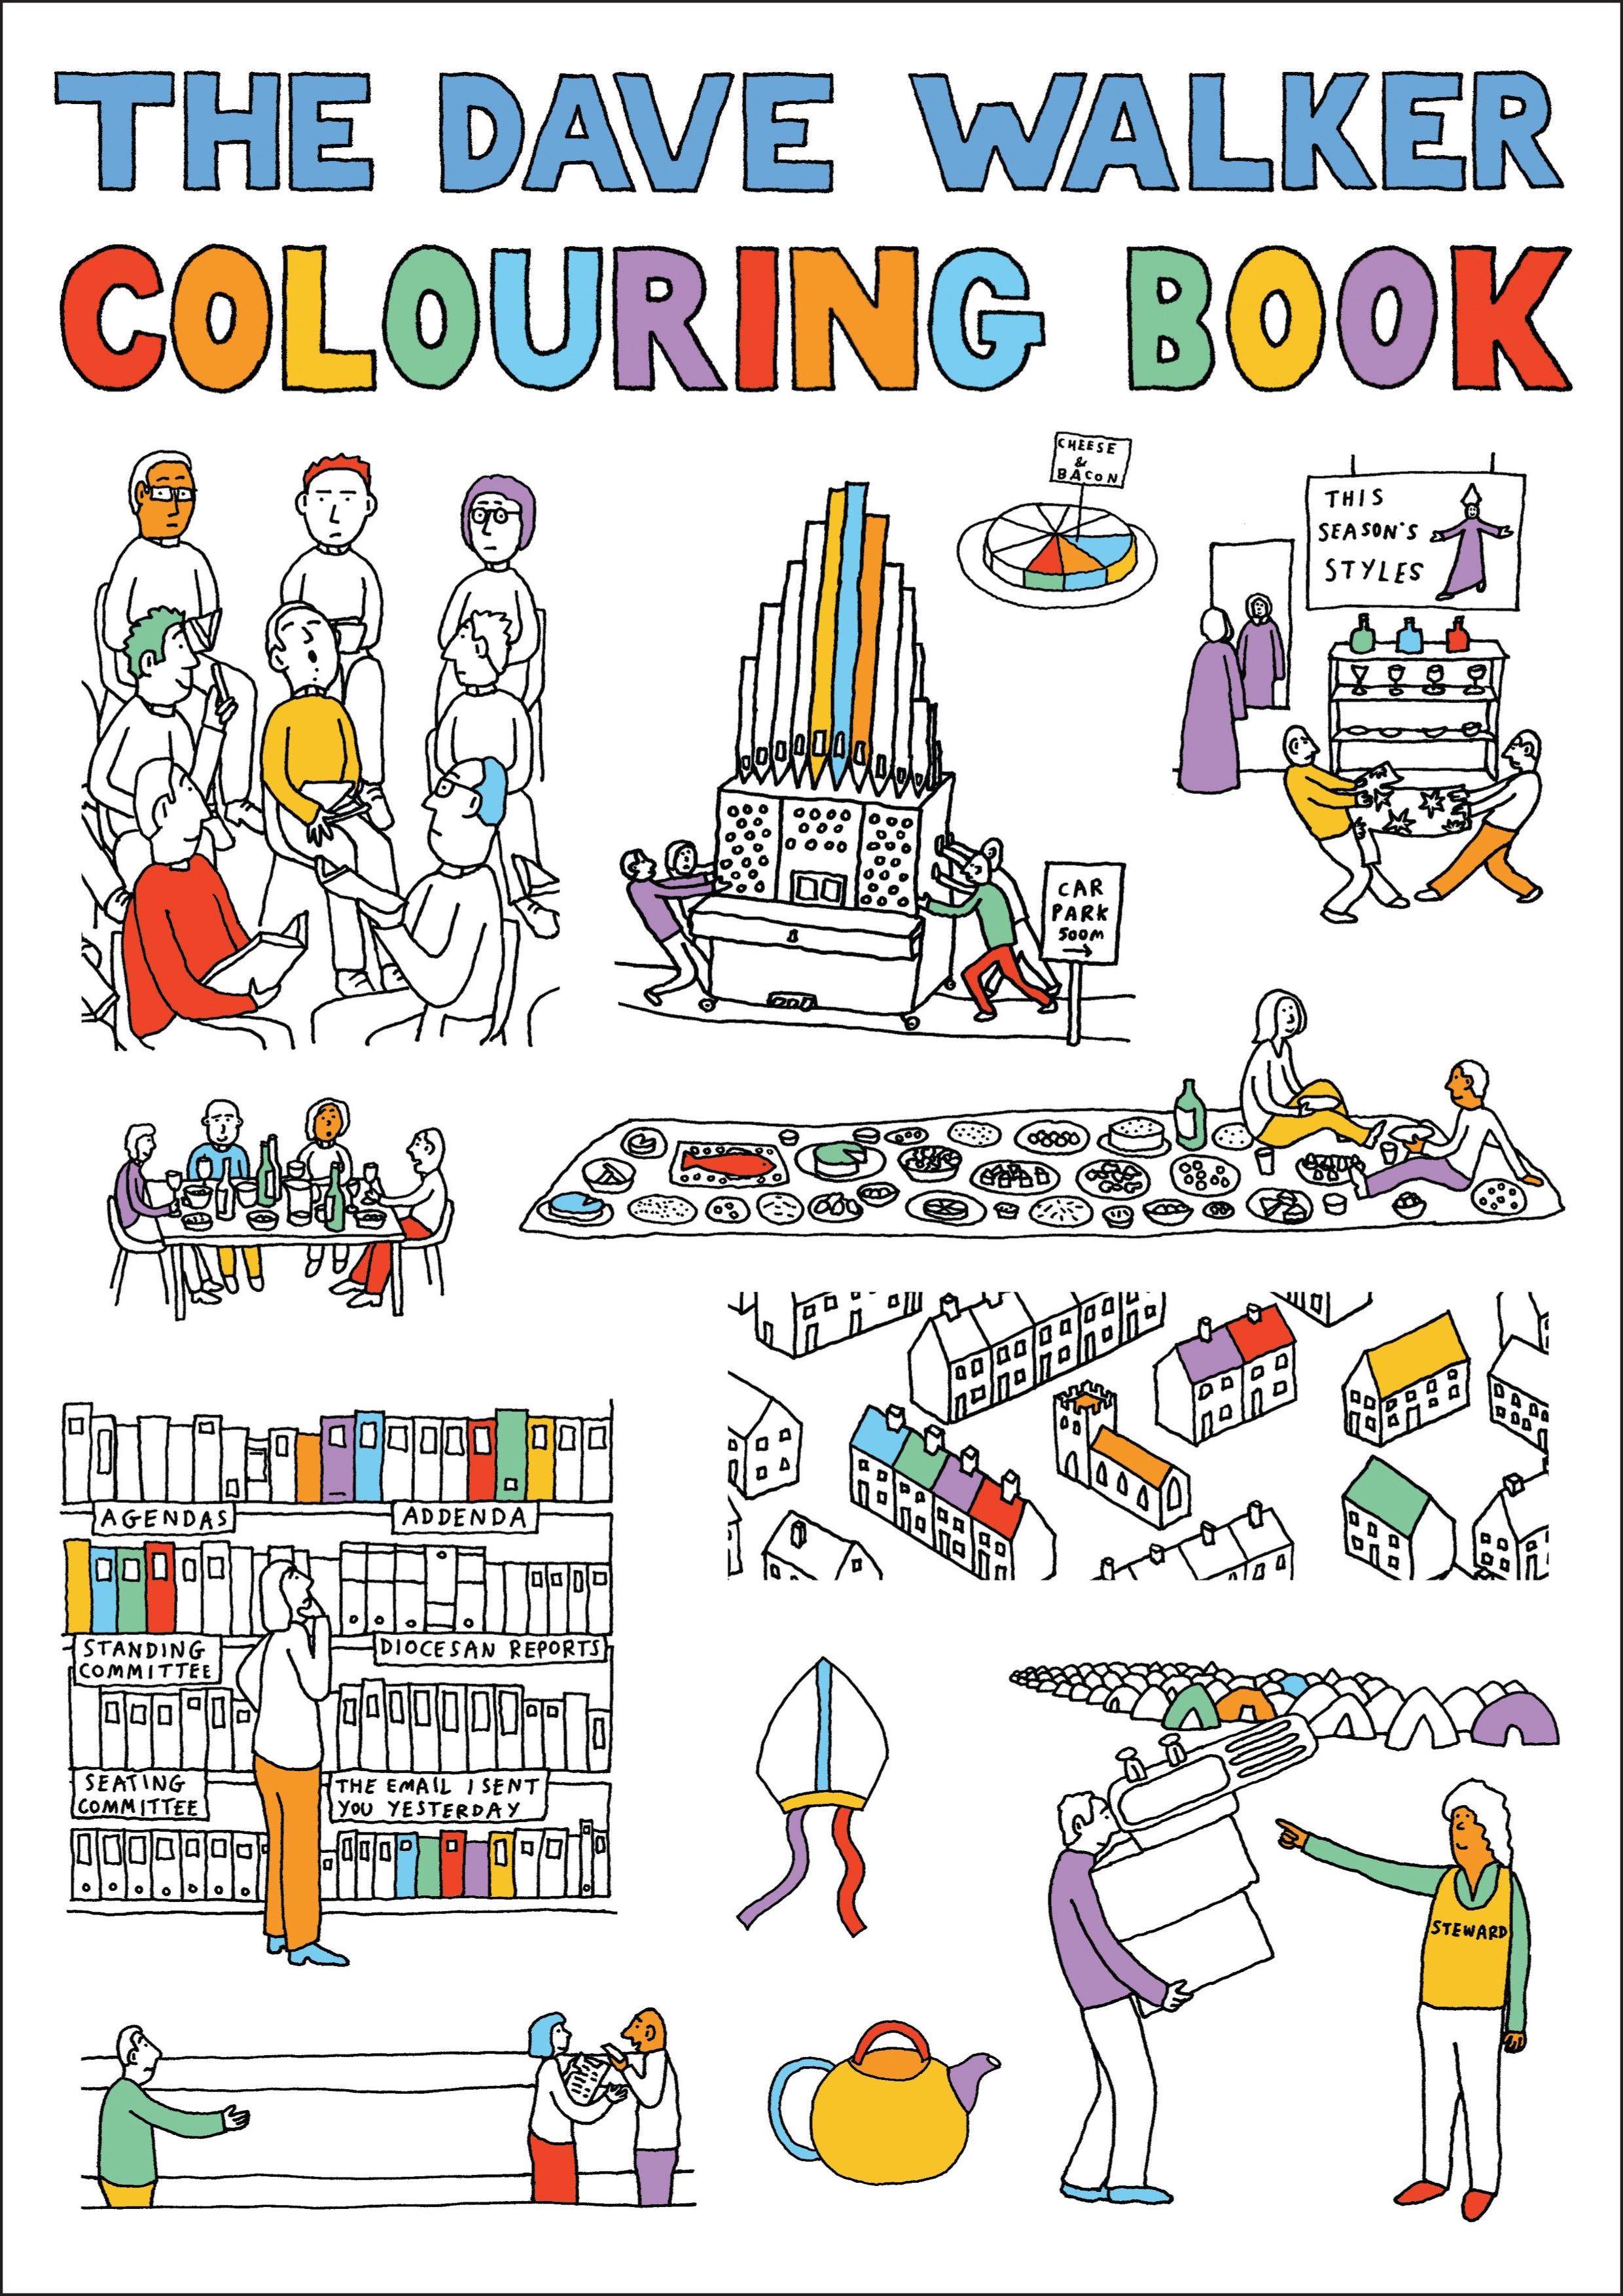 Image of The Dave Walker Colouring Book other